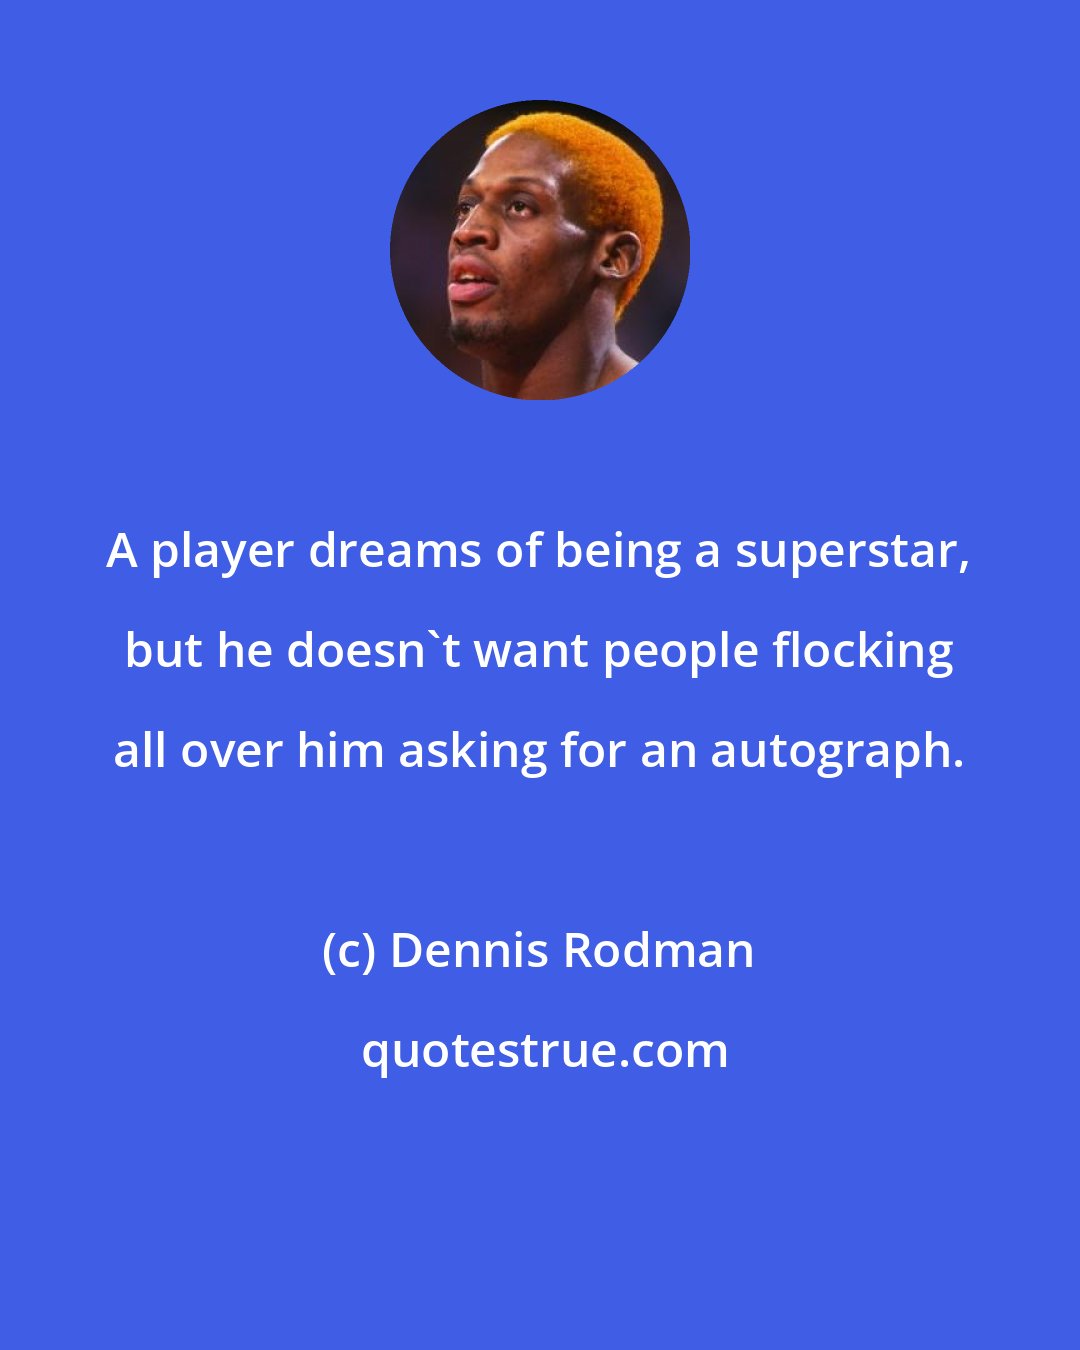 Dennis Rodman: A player dreams of being a superstar, but he doesn't want people flocking all over him asking for an autograph.